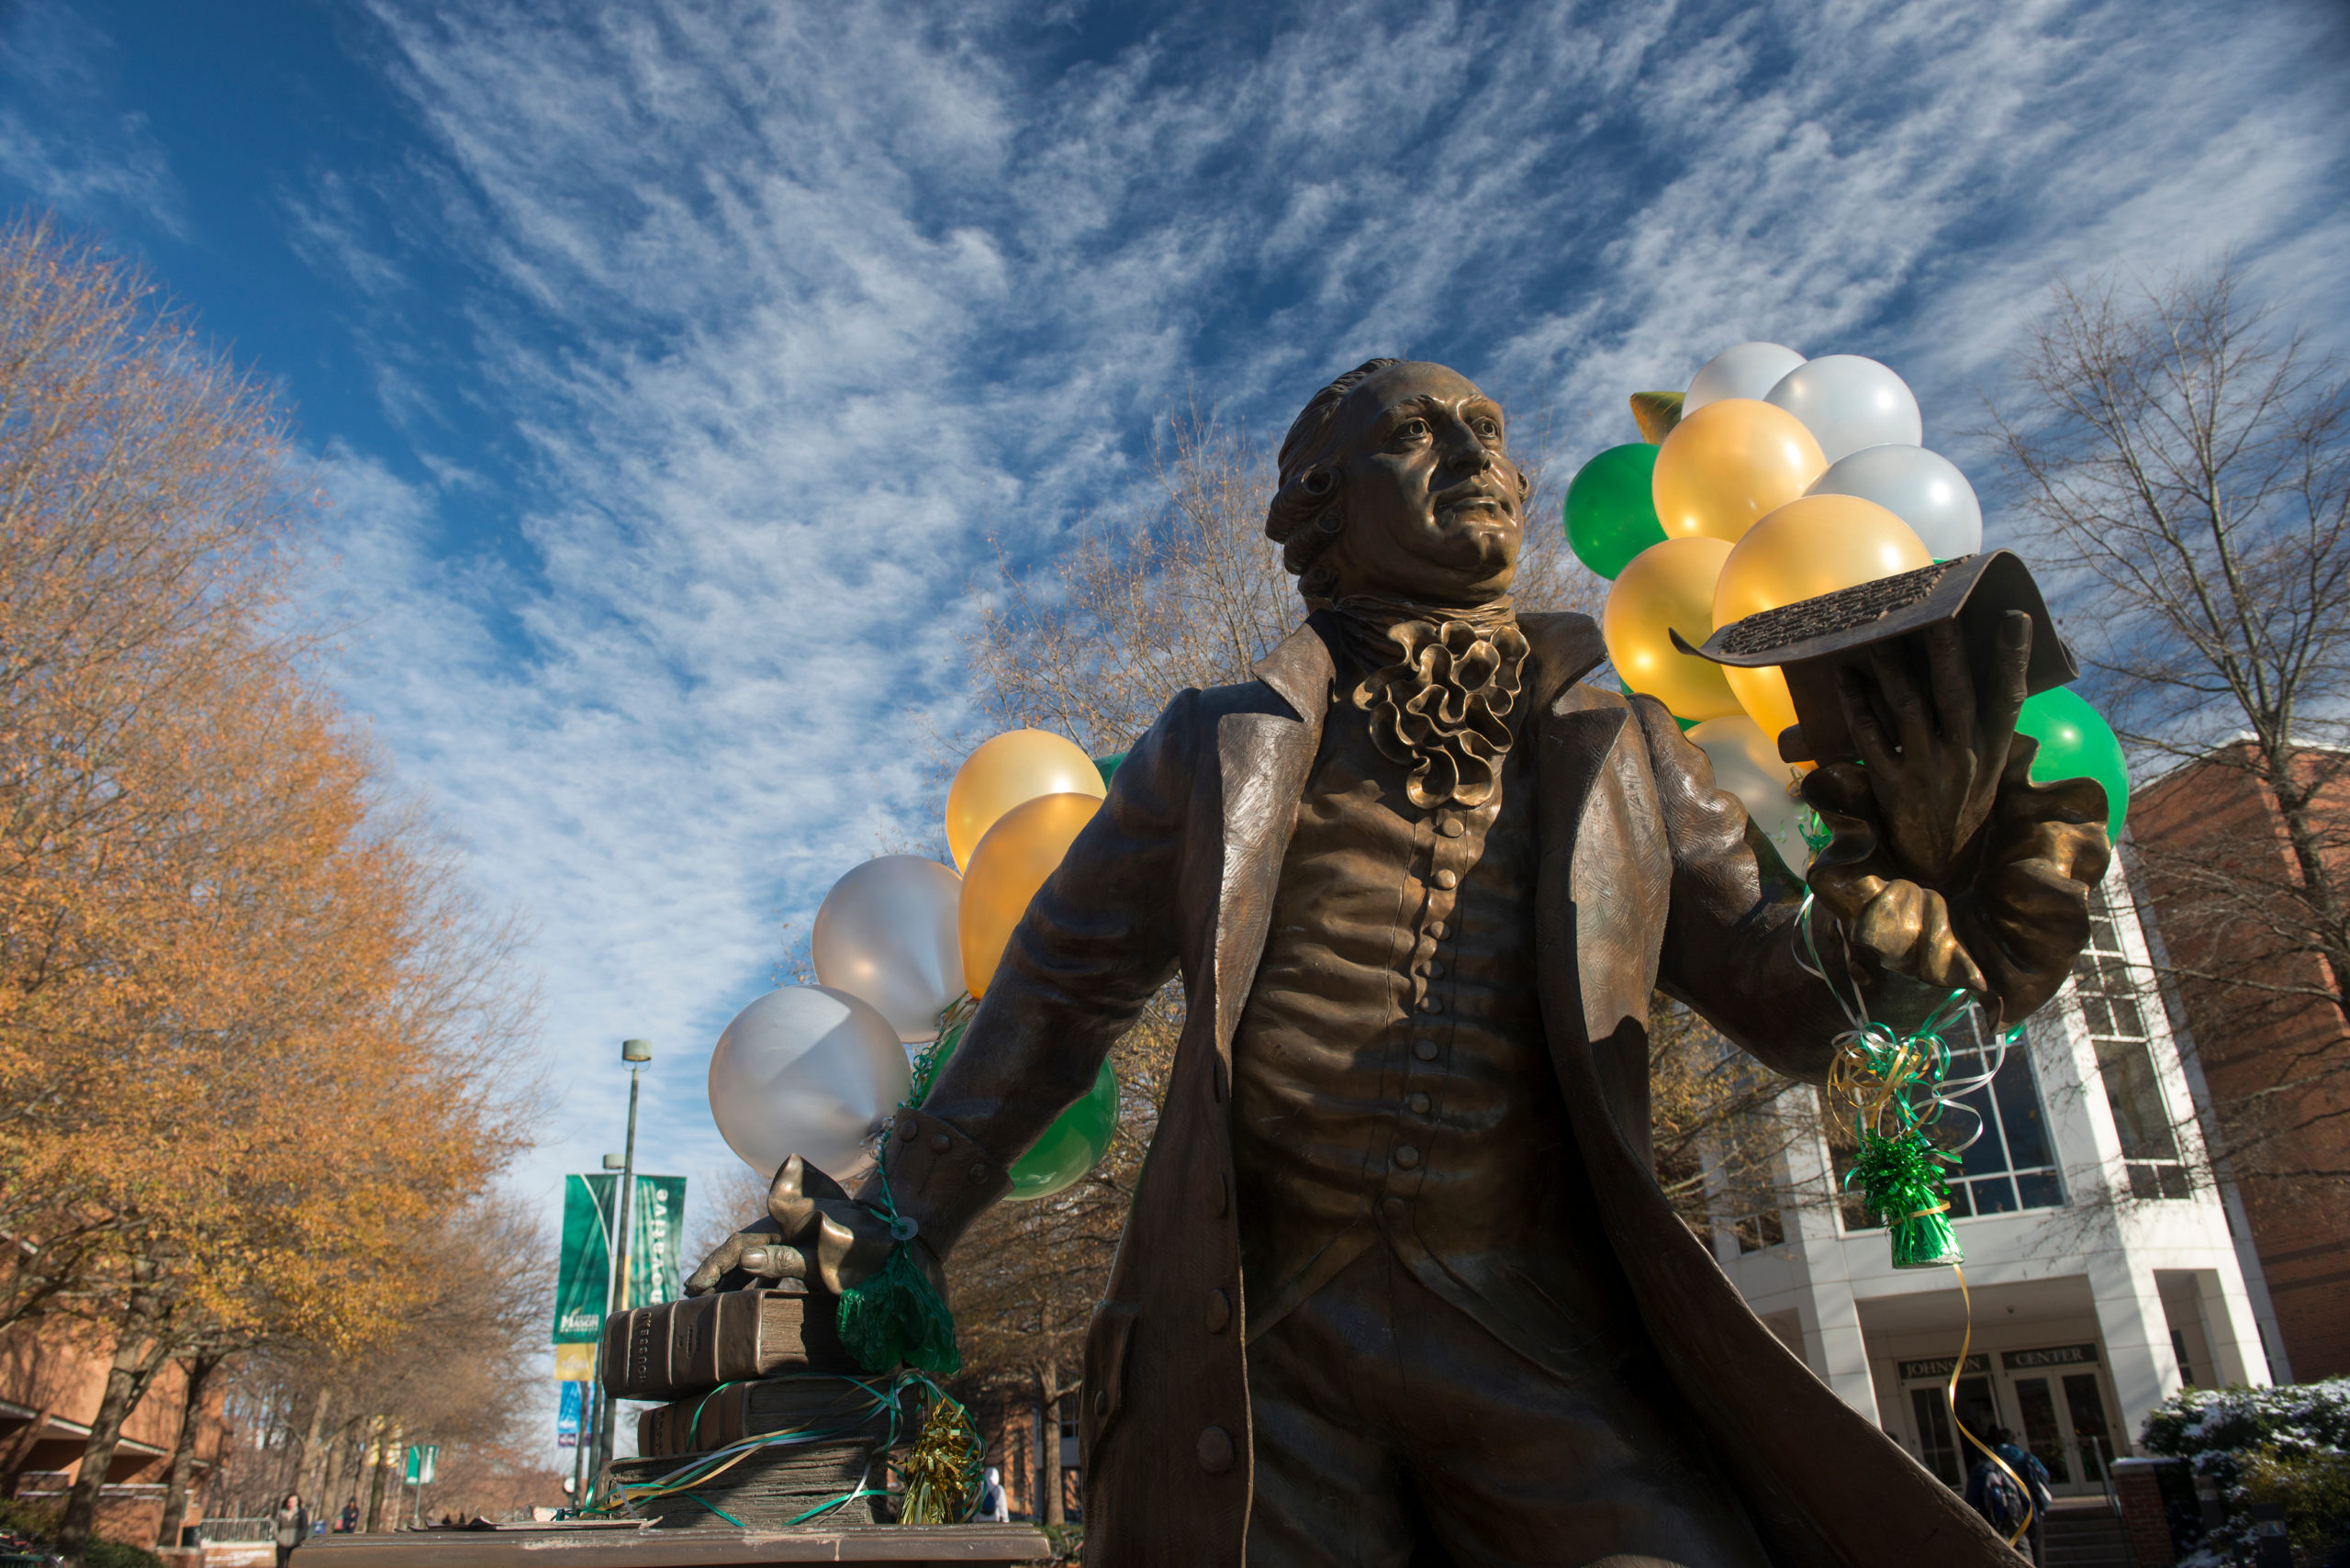 George Mason statue with green and gold balloons. Photo by Evan Cantwell/Creative Services/George Mason University